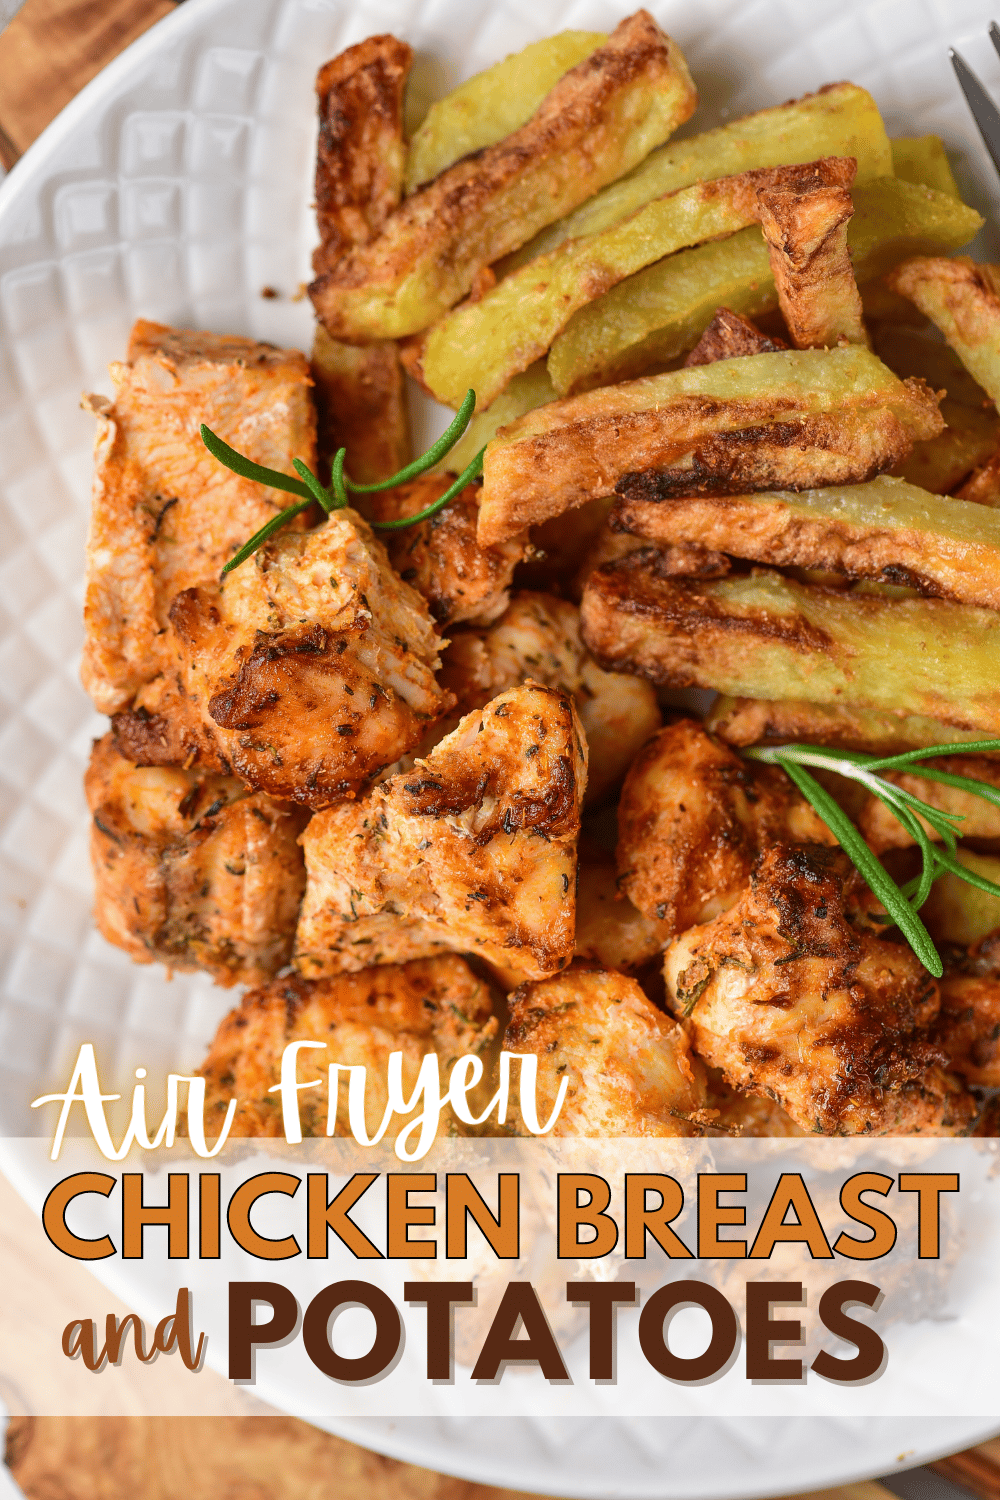 This Air Fryer Chicken Breast and Potatoes recipe is a must-have in your weekly meal rotation. It’s the perfect one-pot meal! #airfryer #chickenbreastandpotatoes #chickenandpotatoes #chicken #potatoes via @wondermomwannab